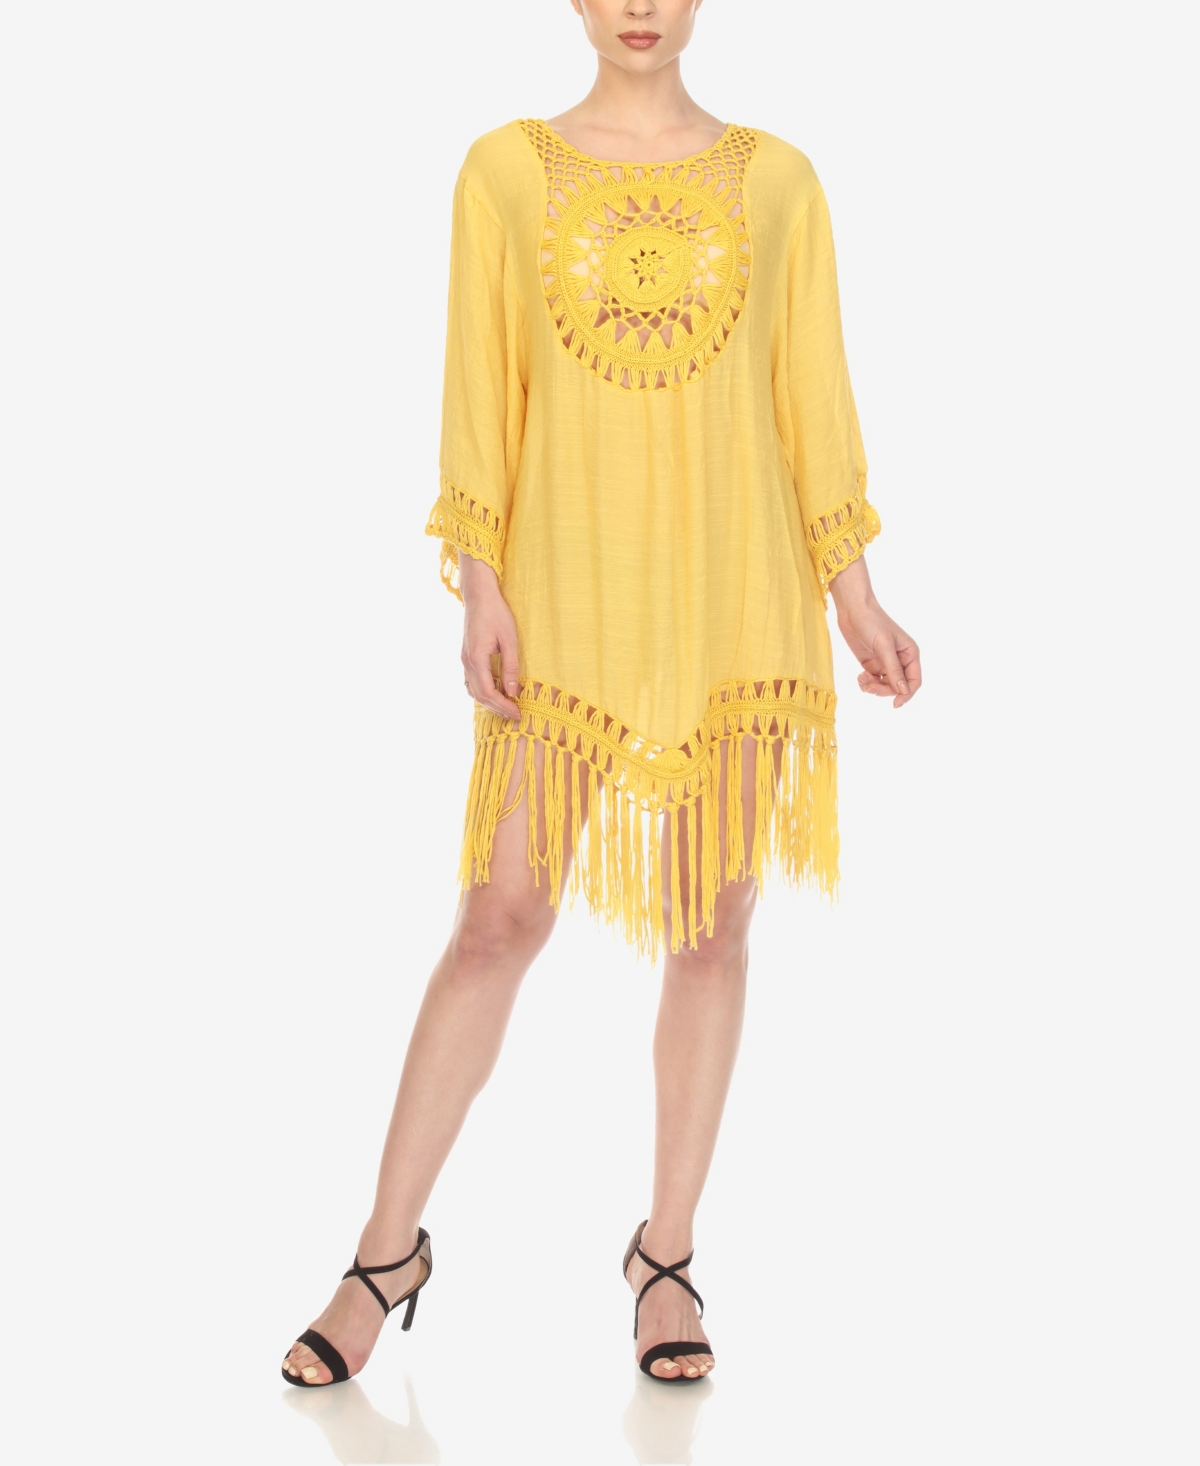 White Mark Women's Crocheted Fringed Trim 3/4 Sleeves Cover Up Dress In Yellow